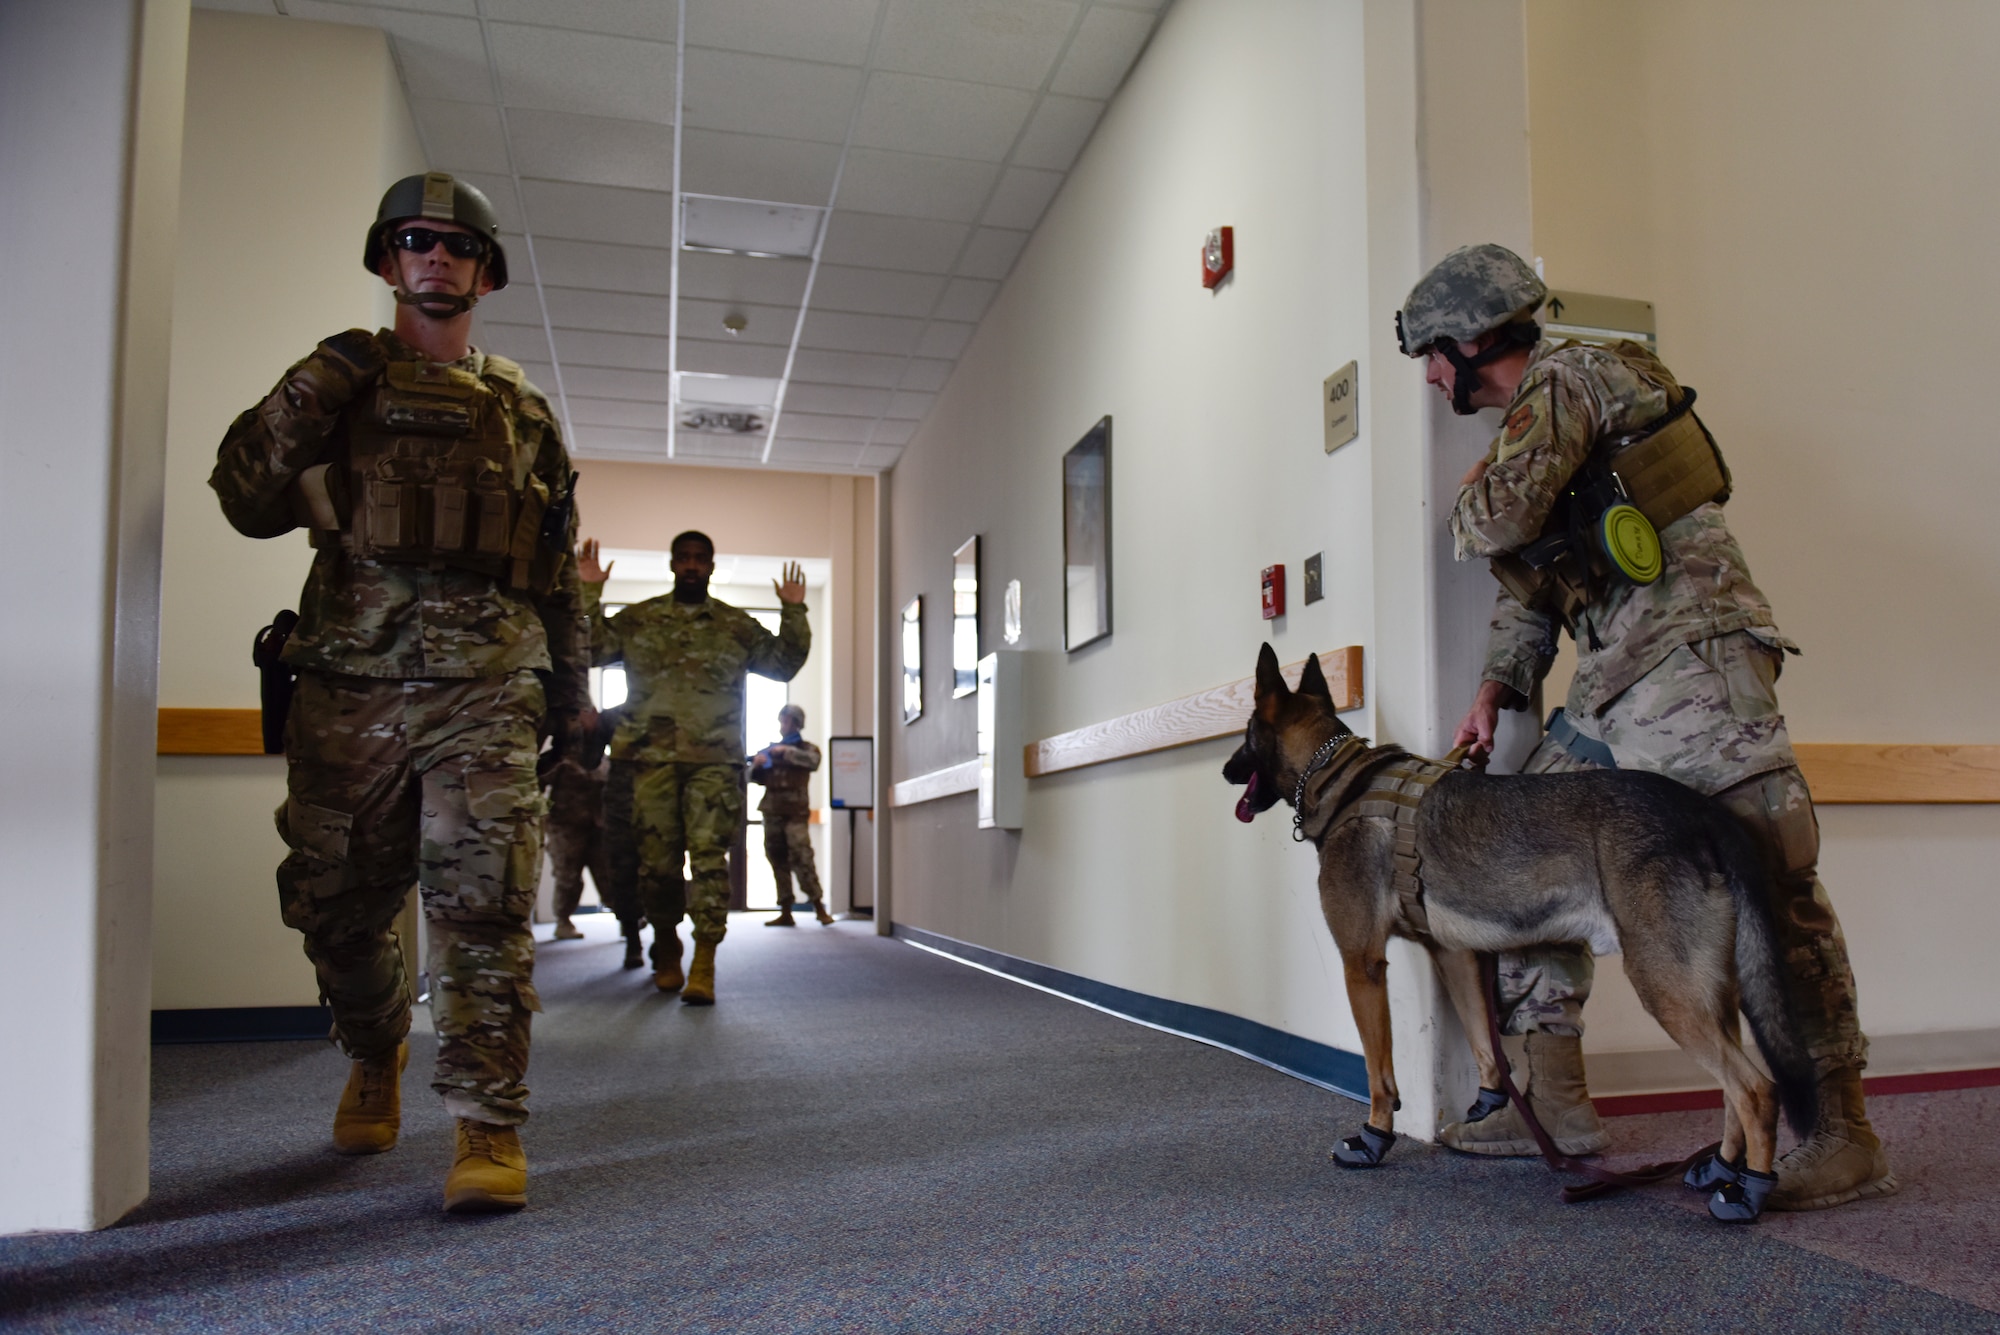 Members of the 47th Security Forces Squadron clear the area during a training exercise at Laughlin Air Force Base, Texas, July 22, 2019. Shortly after apprehending the simulated suspect, the defenders carried on to clear the rest of the building to ensure there was no longer a threat. Exercises like this one are aimed at bolstering crisis readiness and response capabilities. (U.S. Air Force photo by Staff Sgt. Benjamin N. Valmoja)